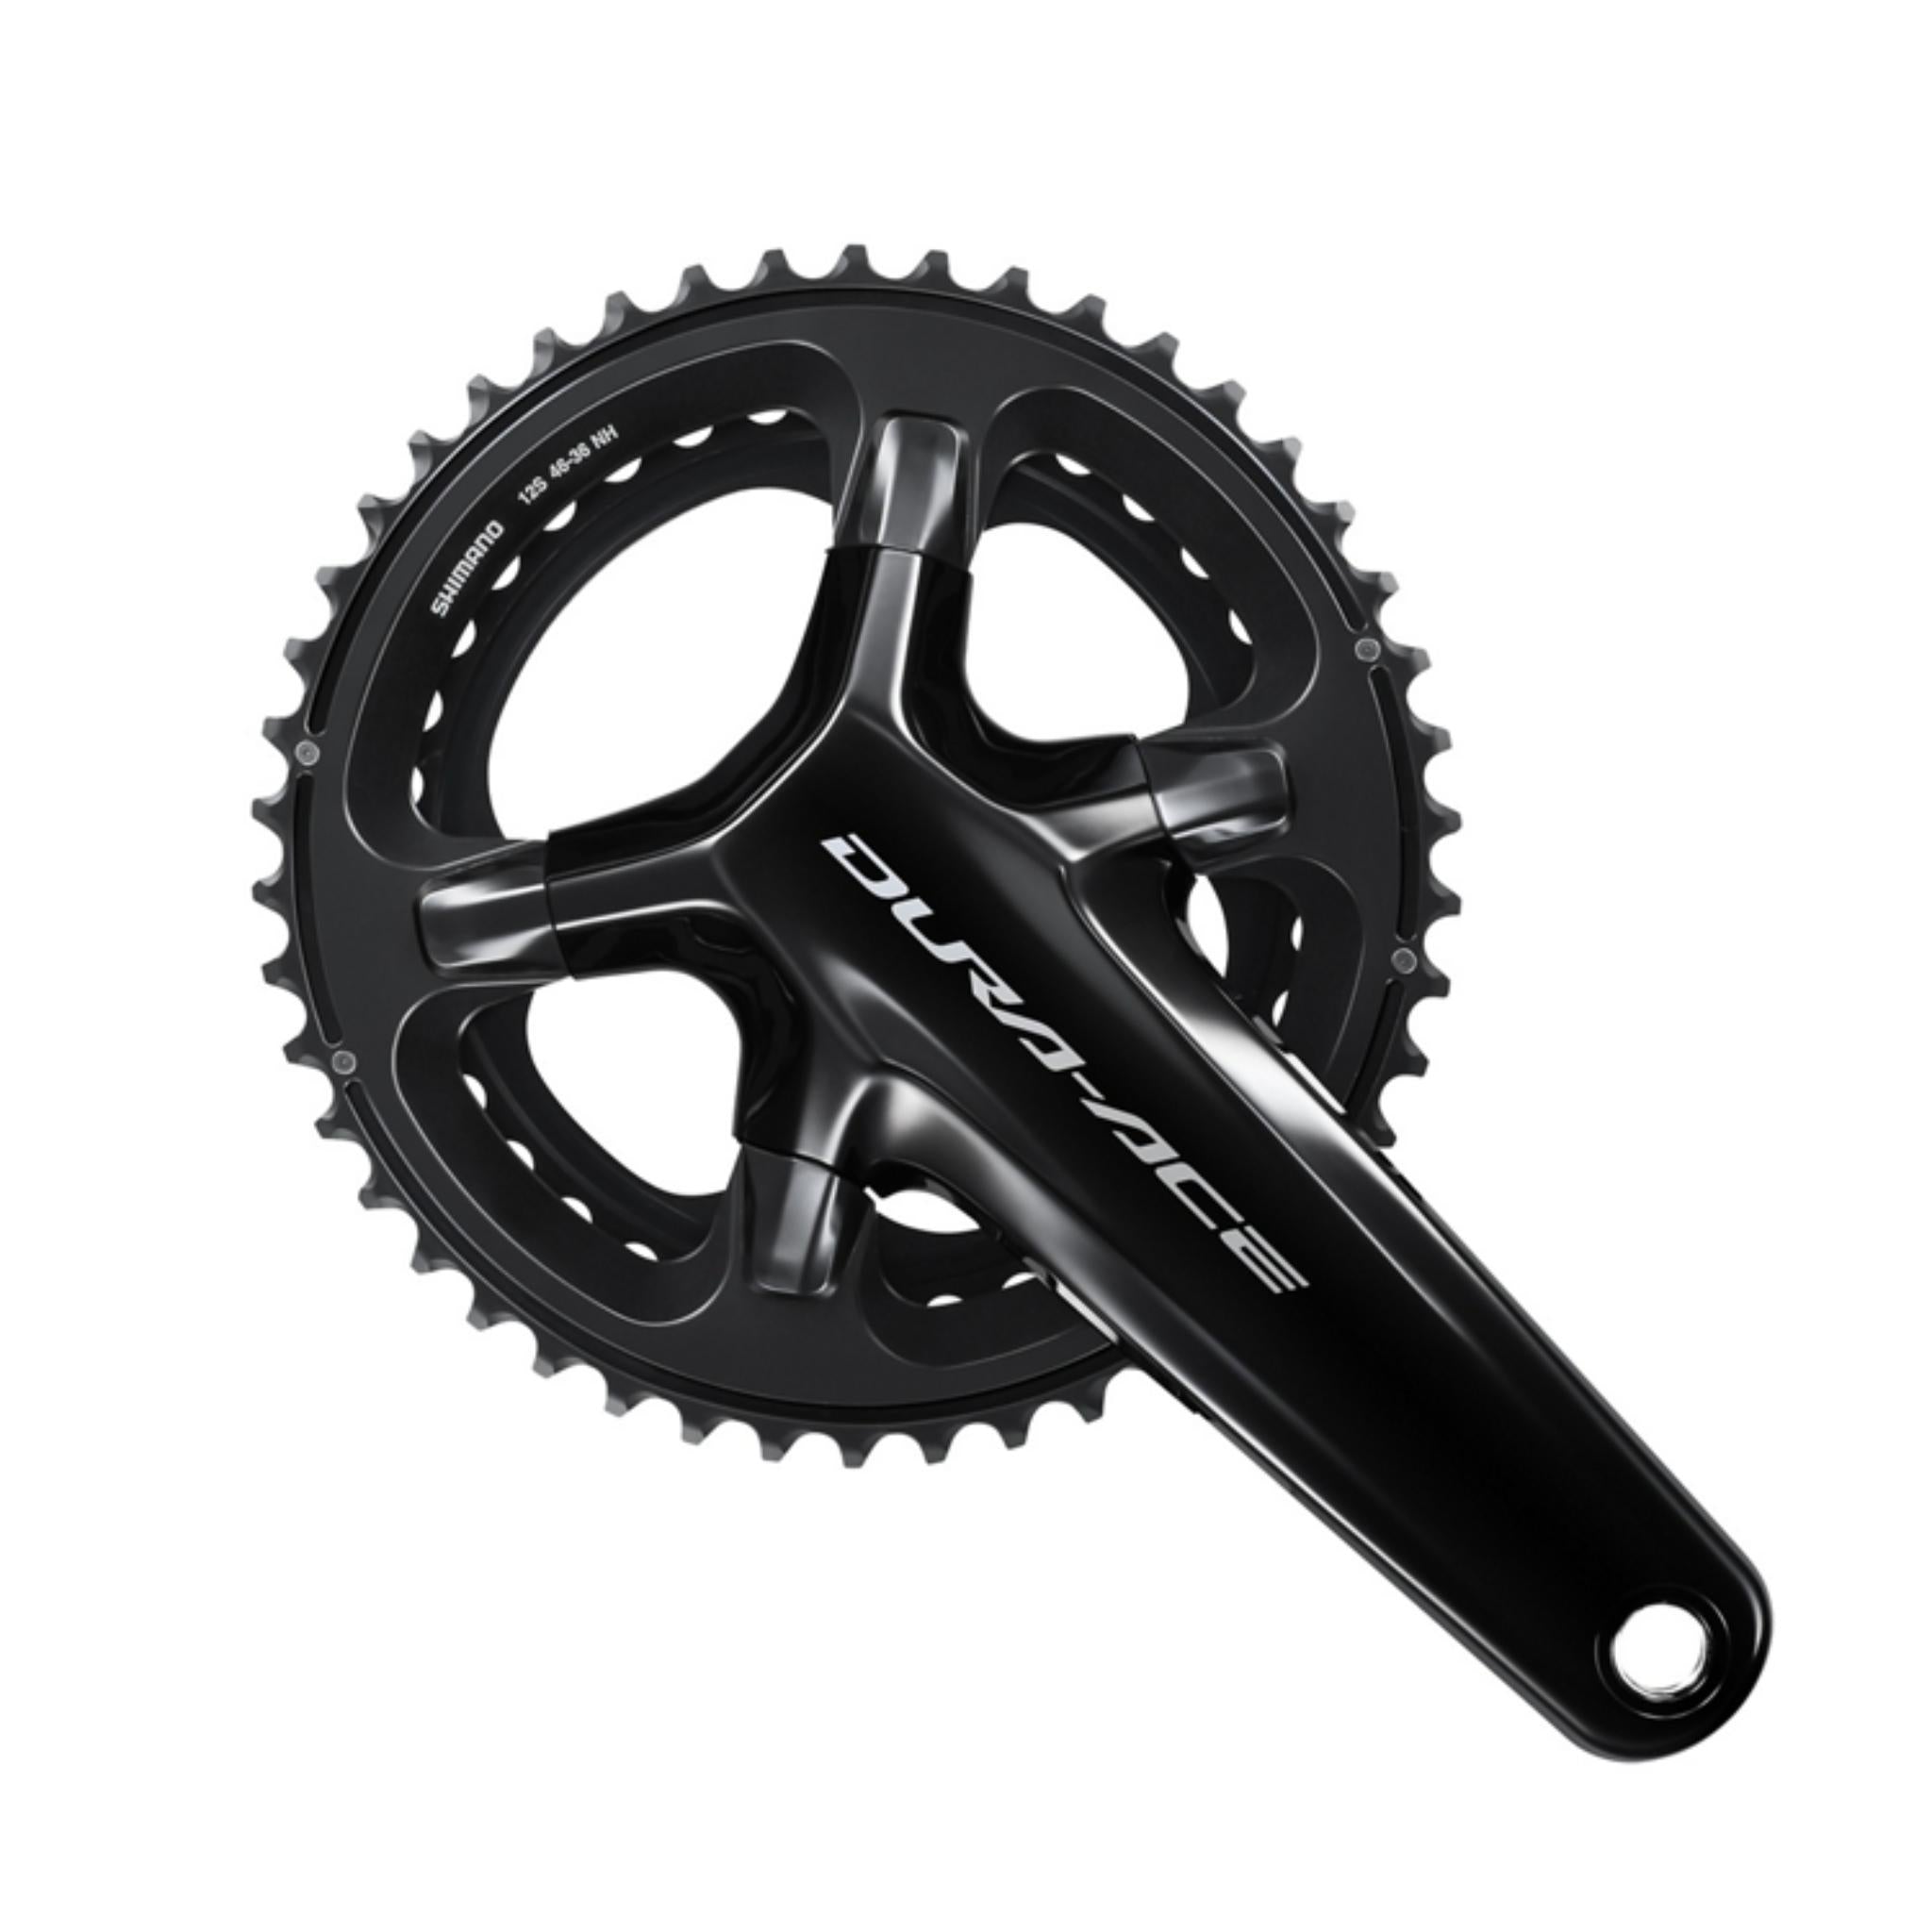 Shimano Dura-Ace FC-R9200 12-Speed Double Chainset - Black